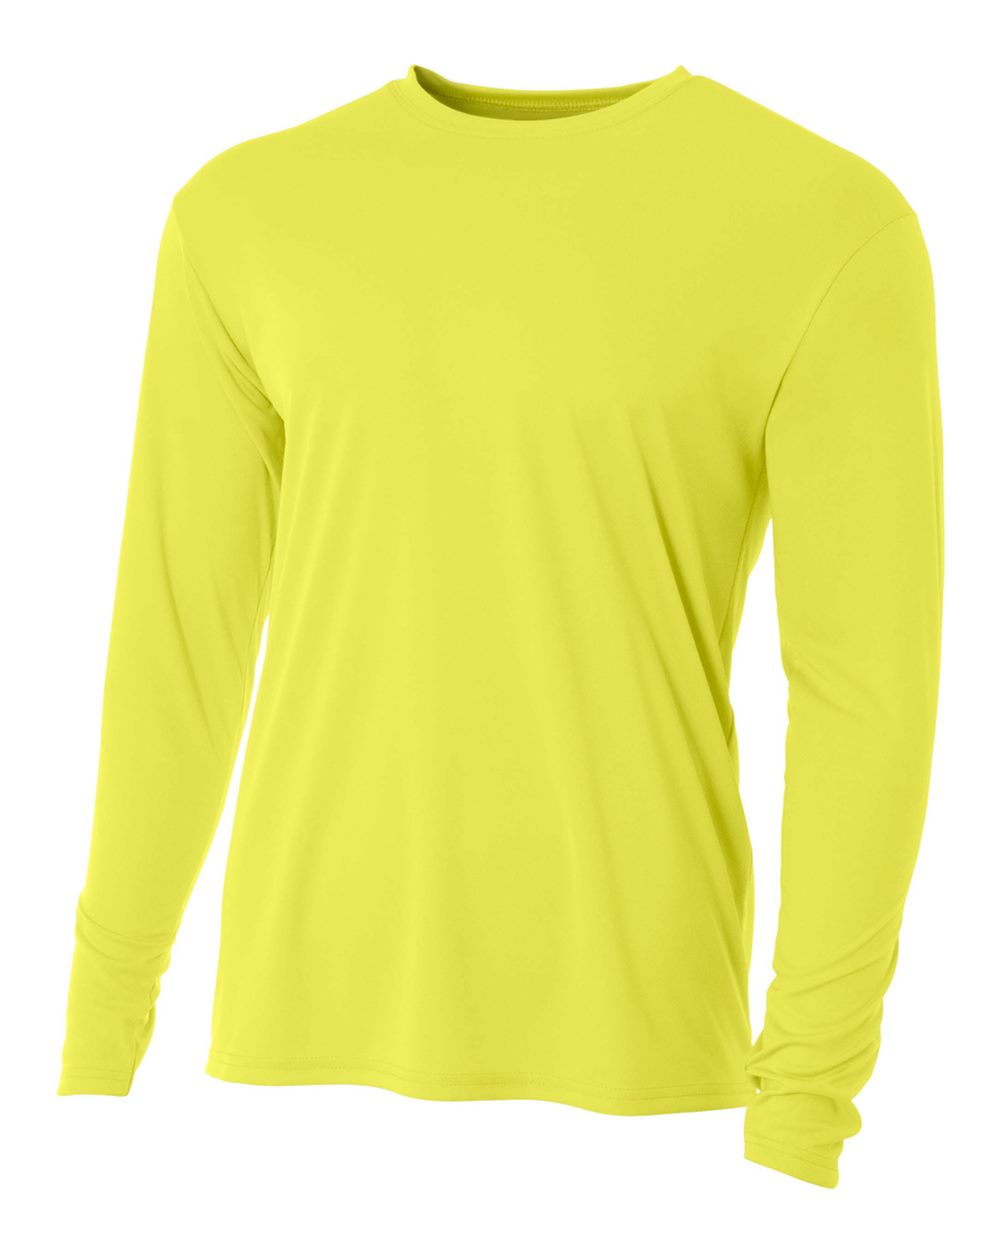 A4 Men&amp;apos;s Performance Long Sleeve Crew (Safety Yellow)